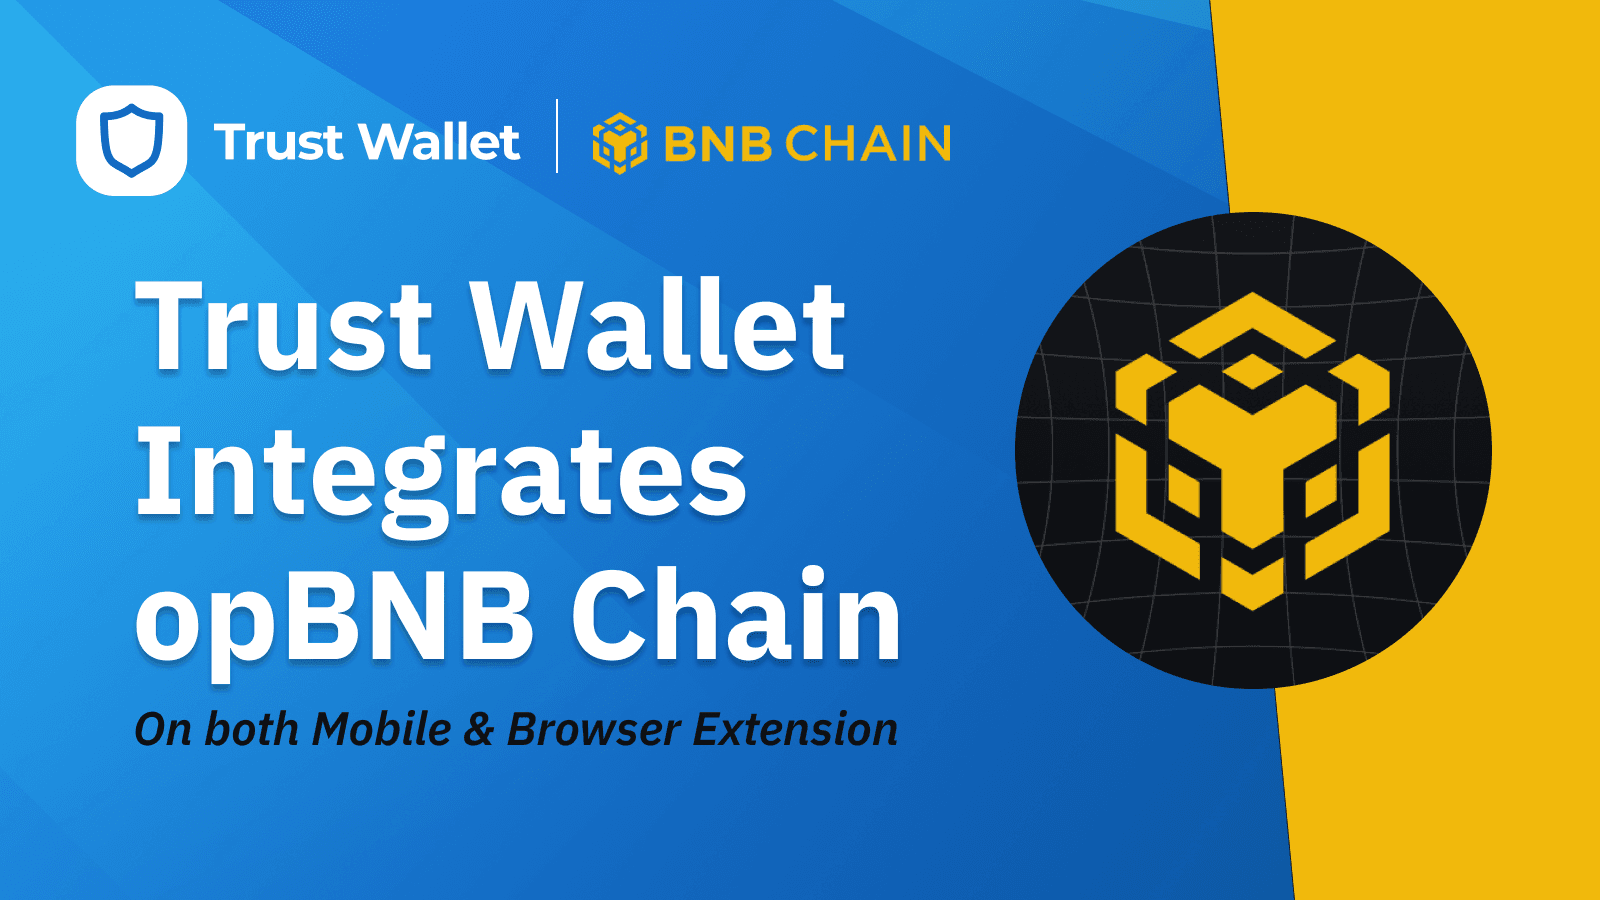 Trust Wallet Integrates opBNB – A Low-Cost, Open-Source Layer 2 Blockchain